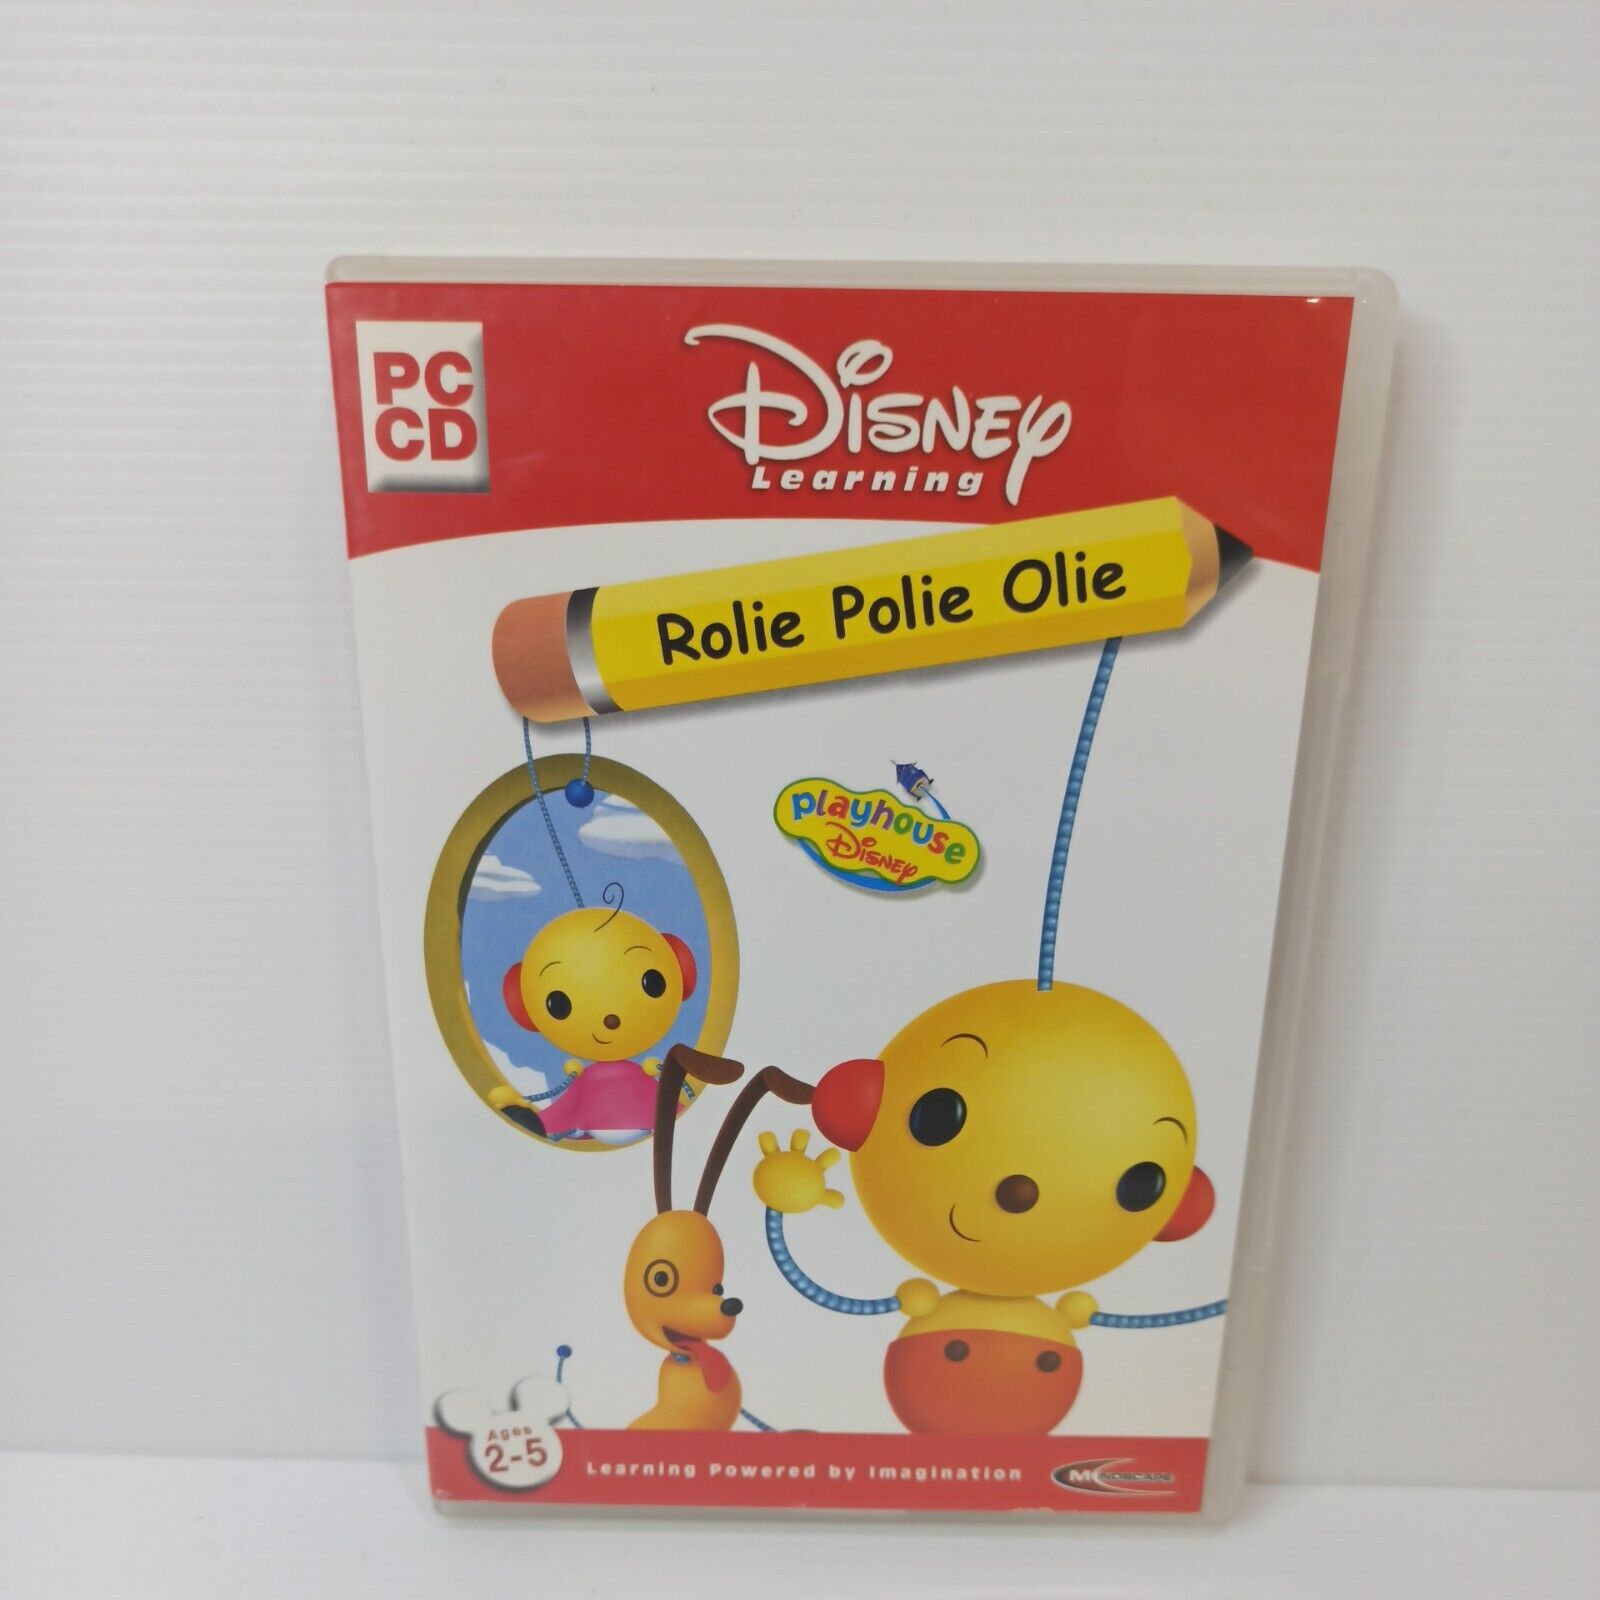 Disney Learning Rolie Polie Olie Playhouse Interactive PC Game Robots Robotics